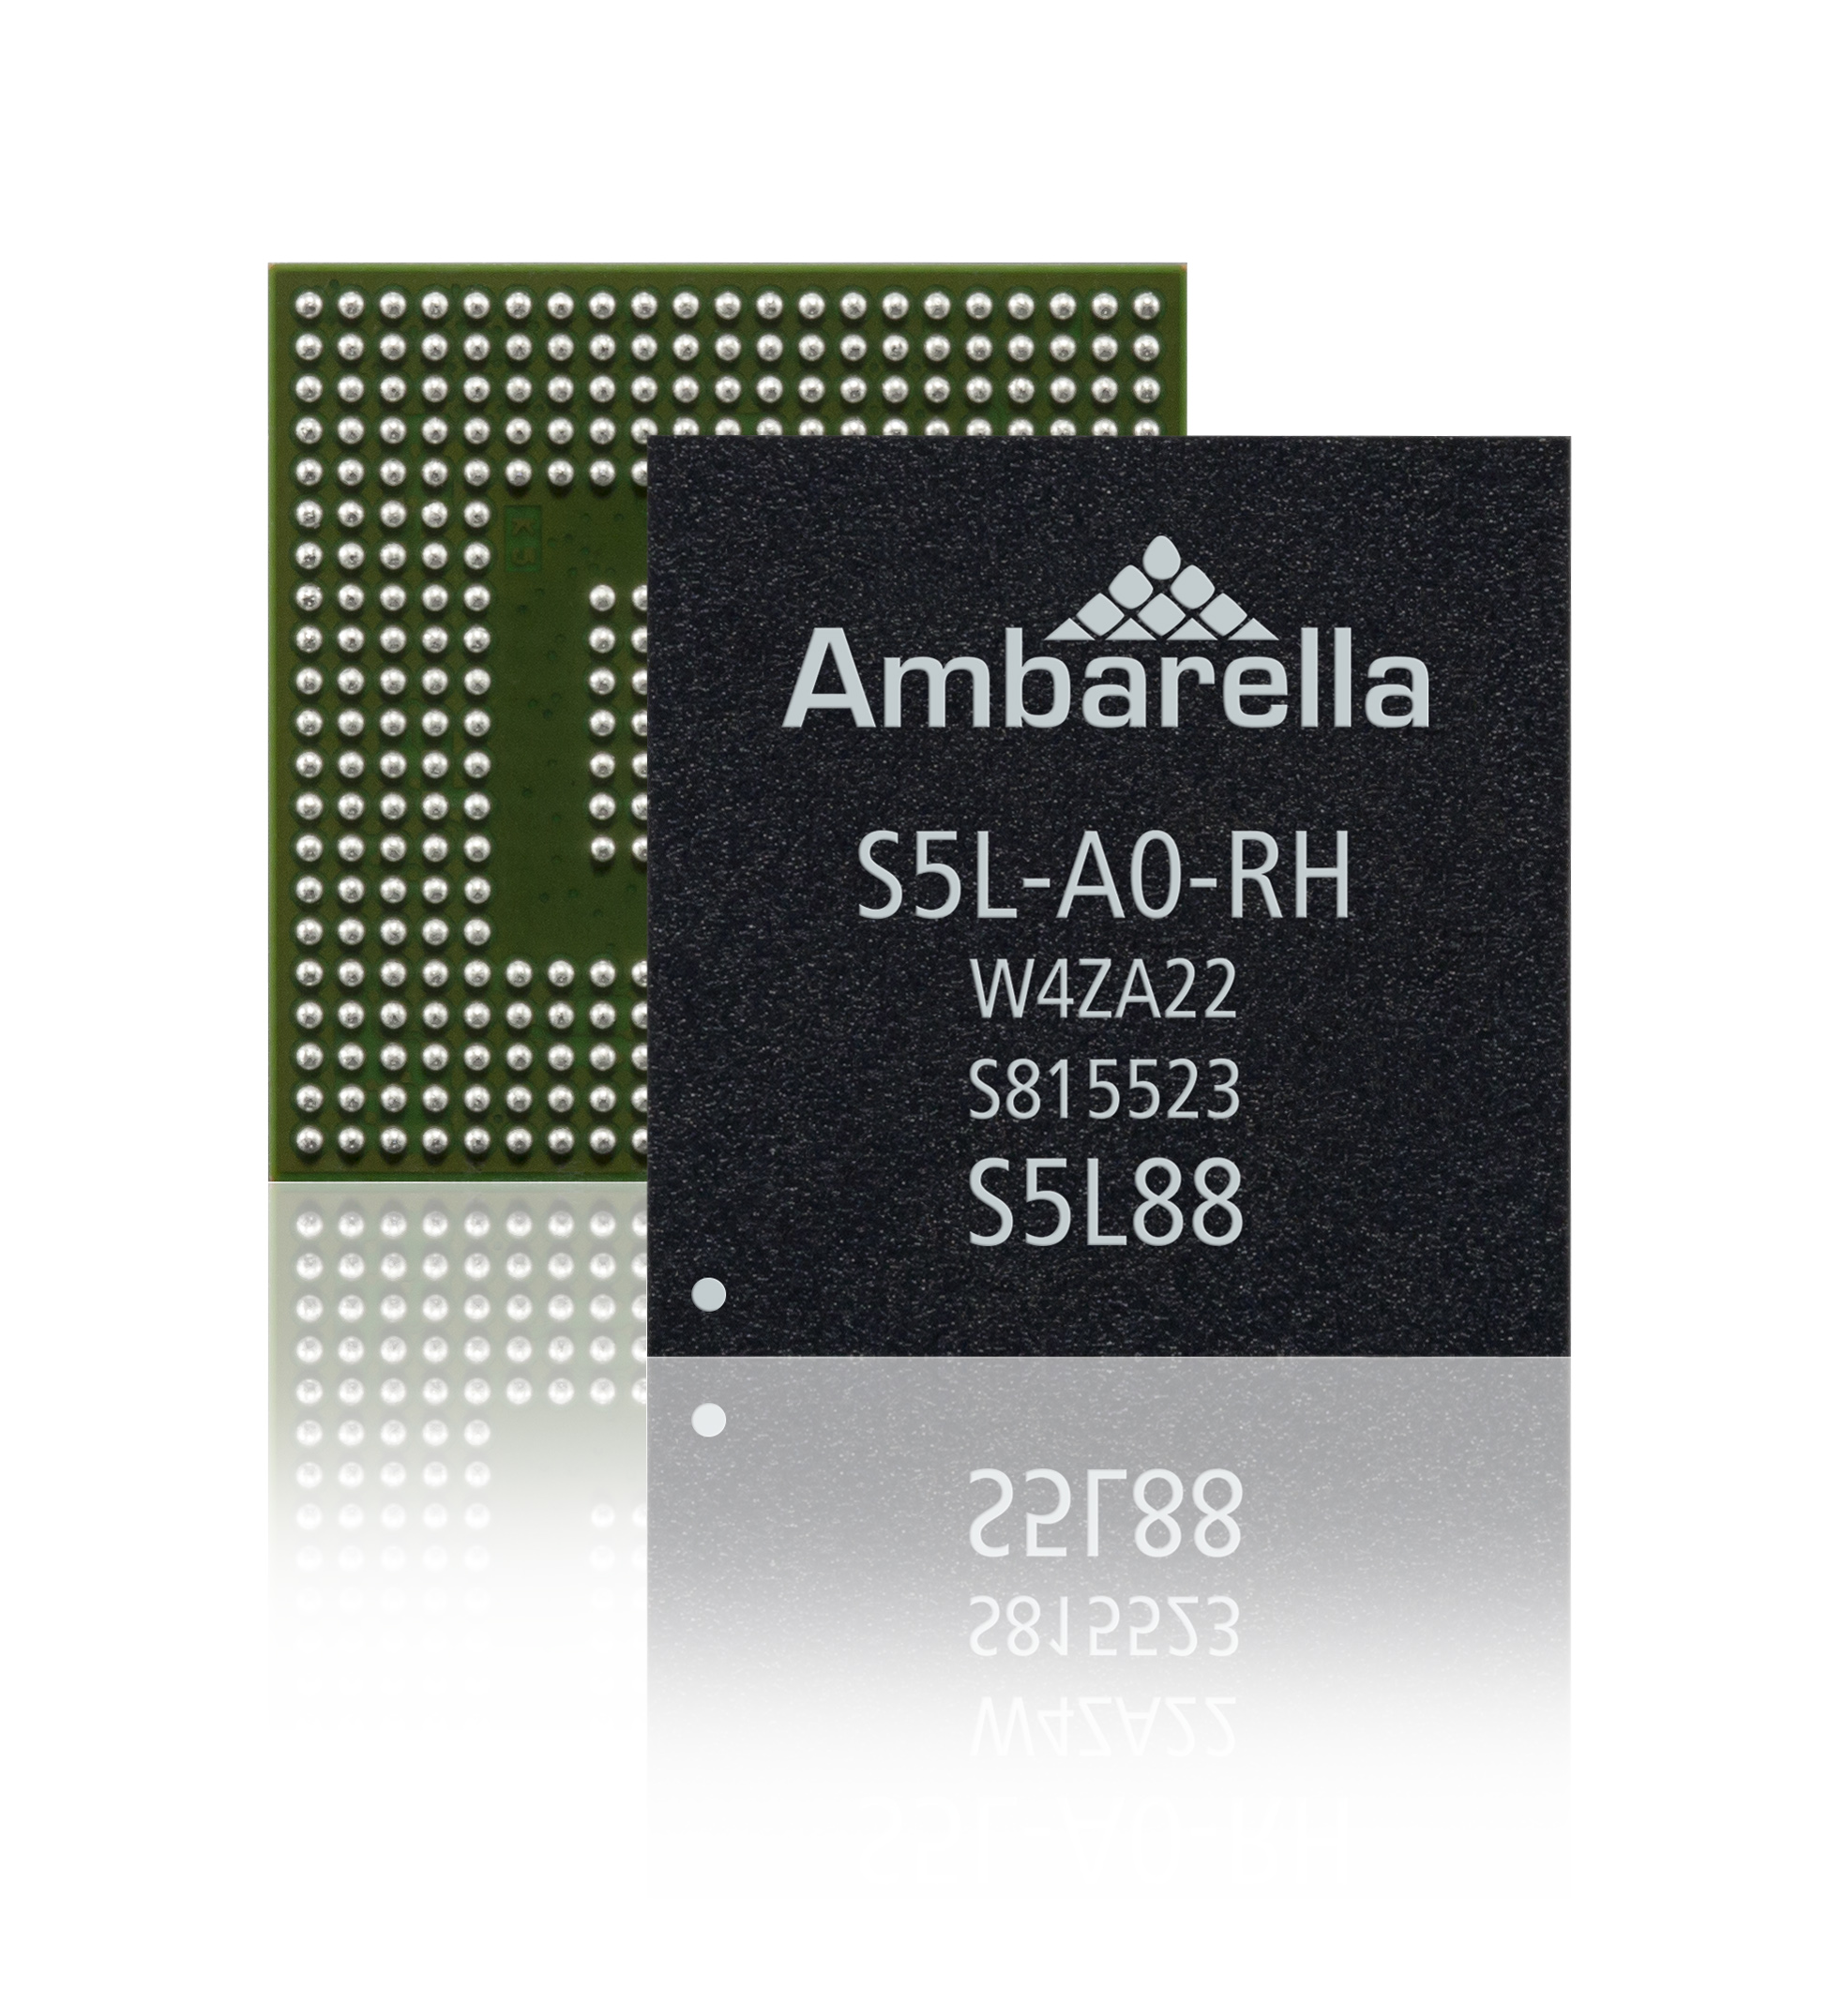  Ambarella Introduces the S5L Family of 4K SoCs for Professional, Consumer and Battery-Powered IP Security Cameras